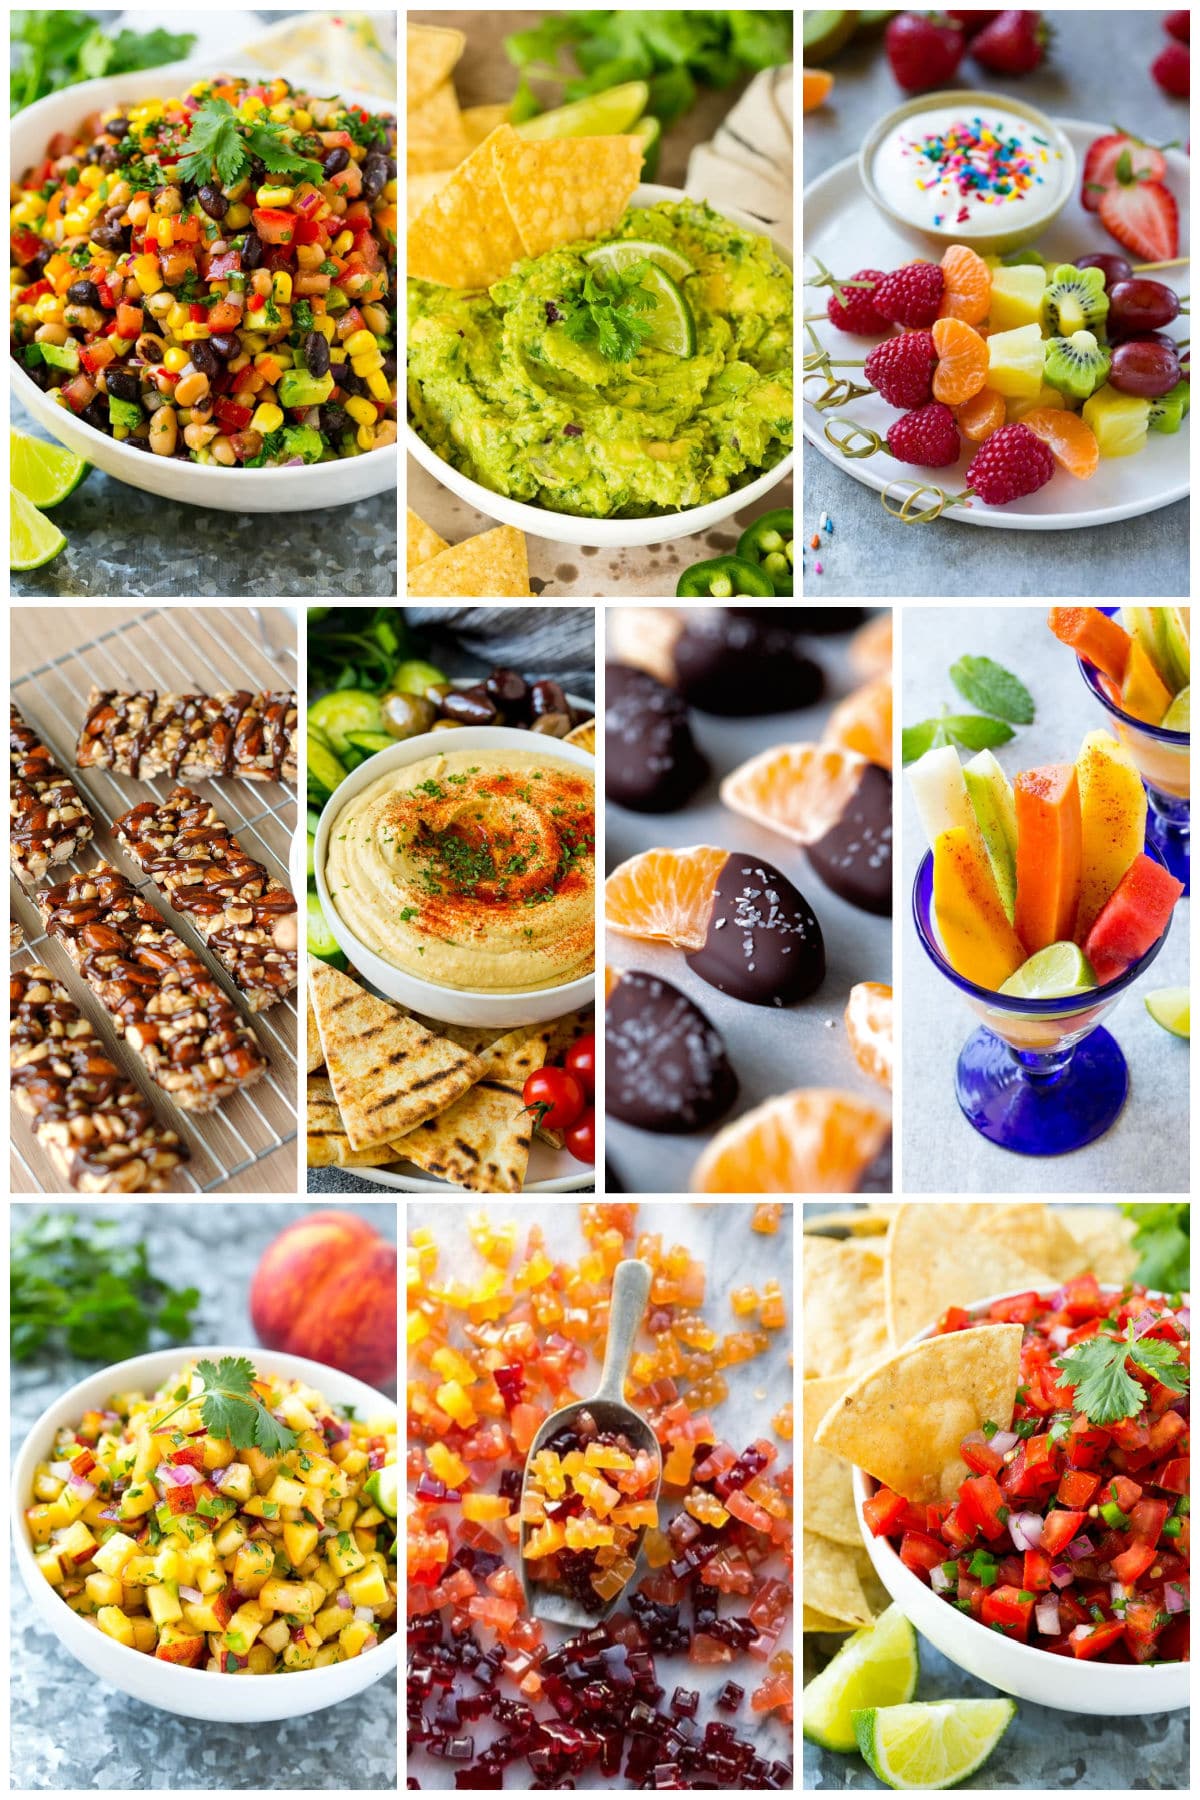 A collection of images of colorful quick bites like hummus and fruit kabobs.